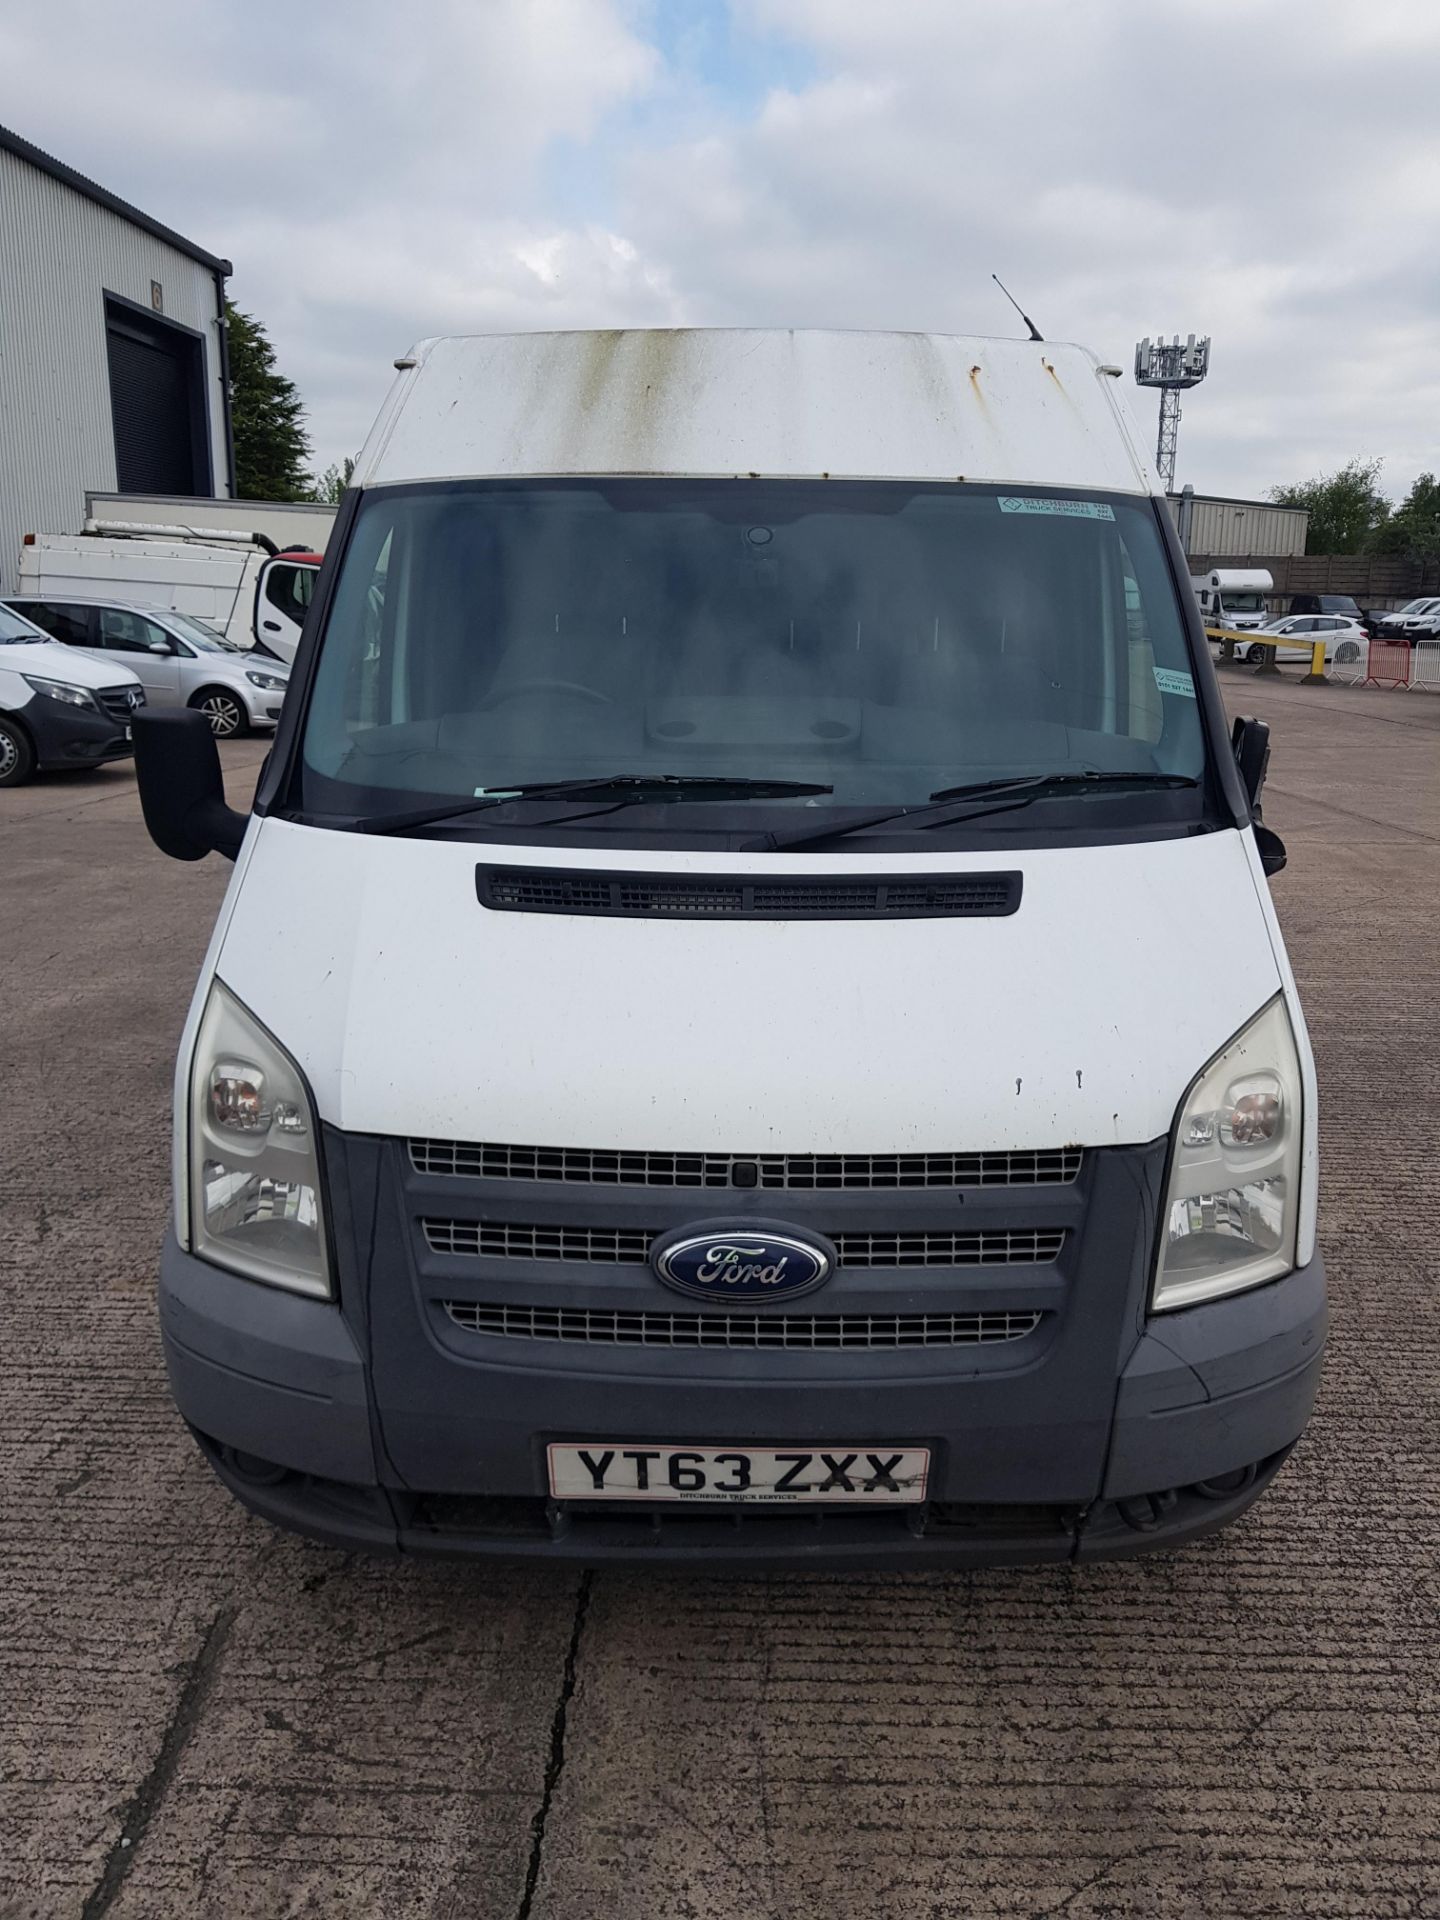 WHITE FORD TRANSIT 125 T350 RWD DIESEL PANEL VAN 2198CC FIRST REGISTERED 11/2/2014 REG: YT63ZXX - Image 5 of 11